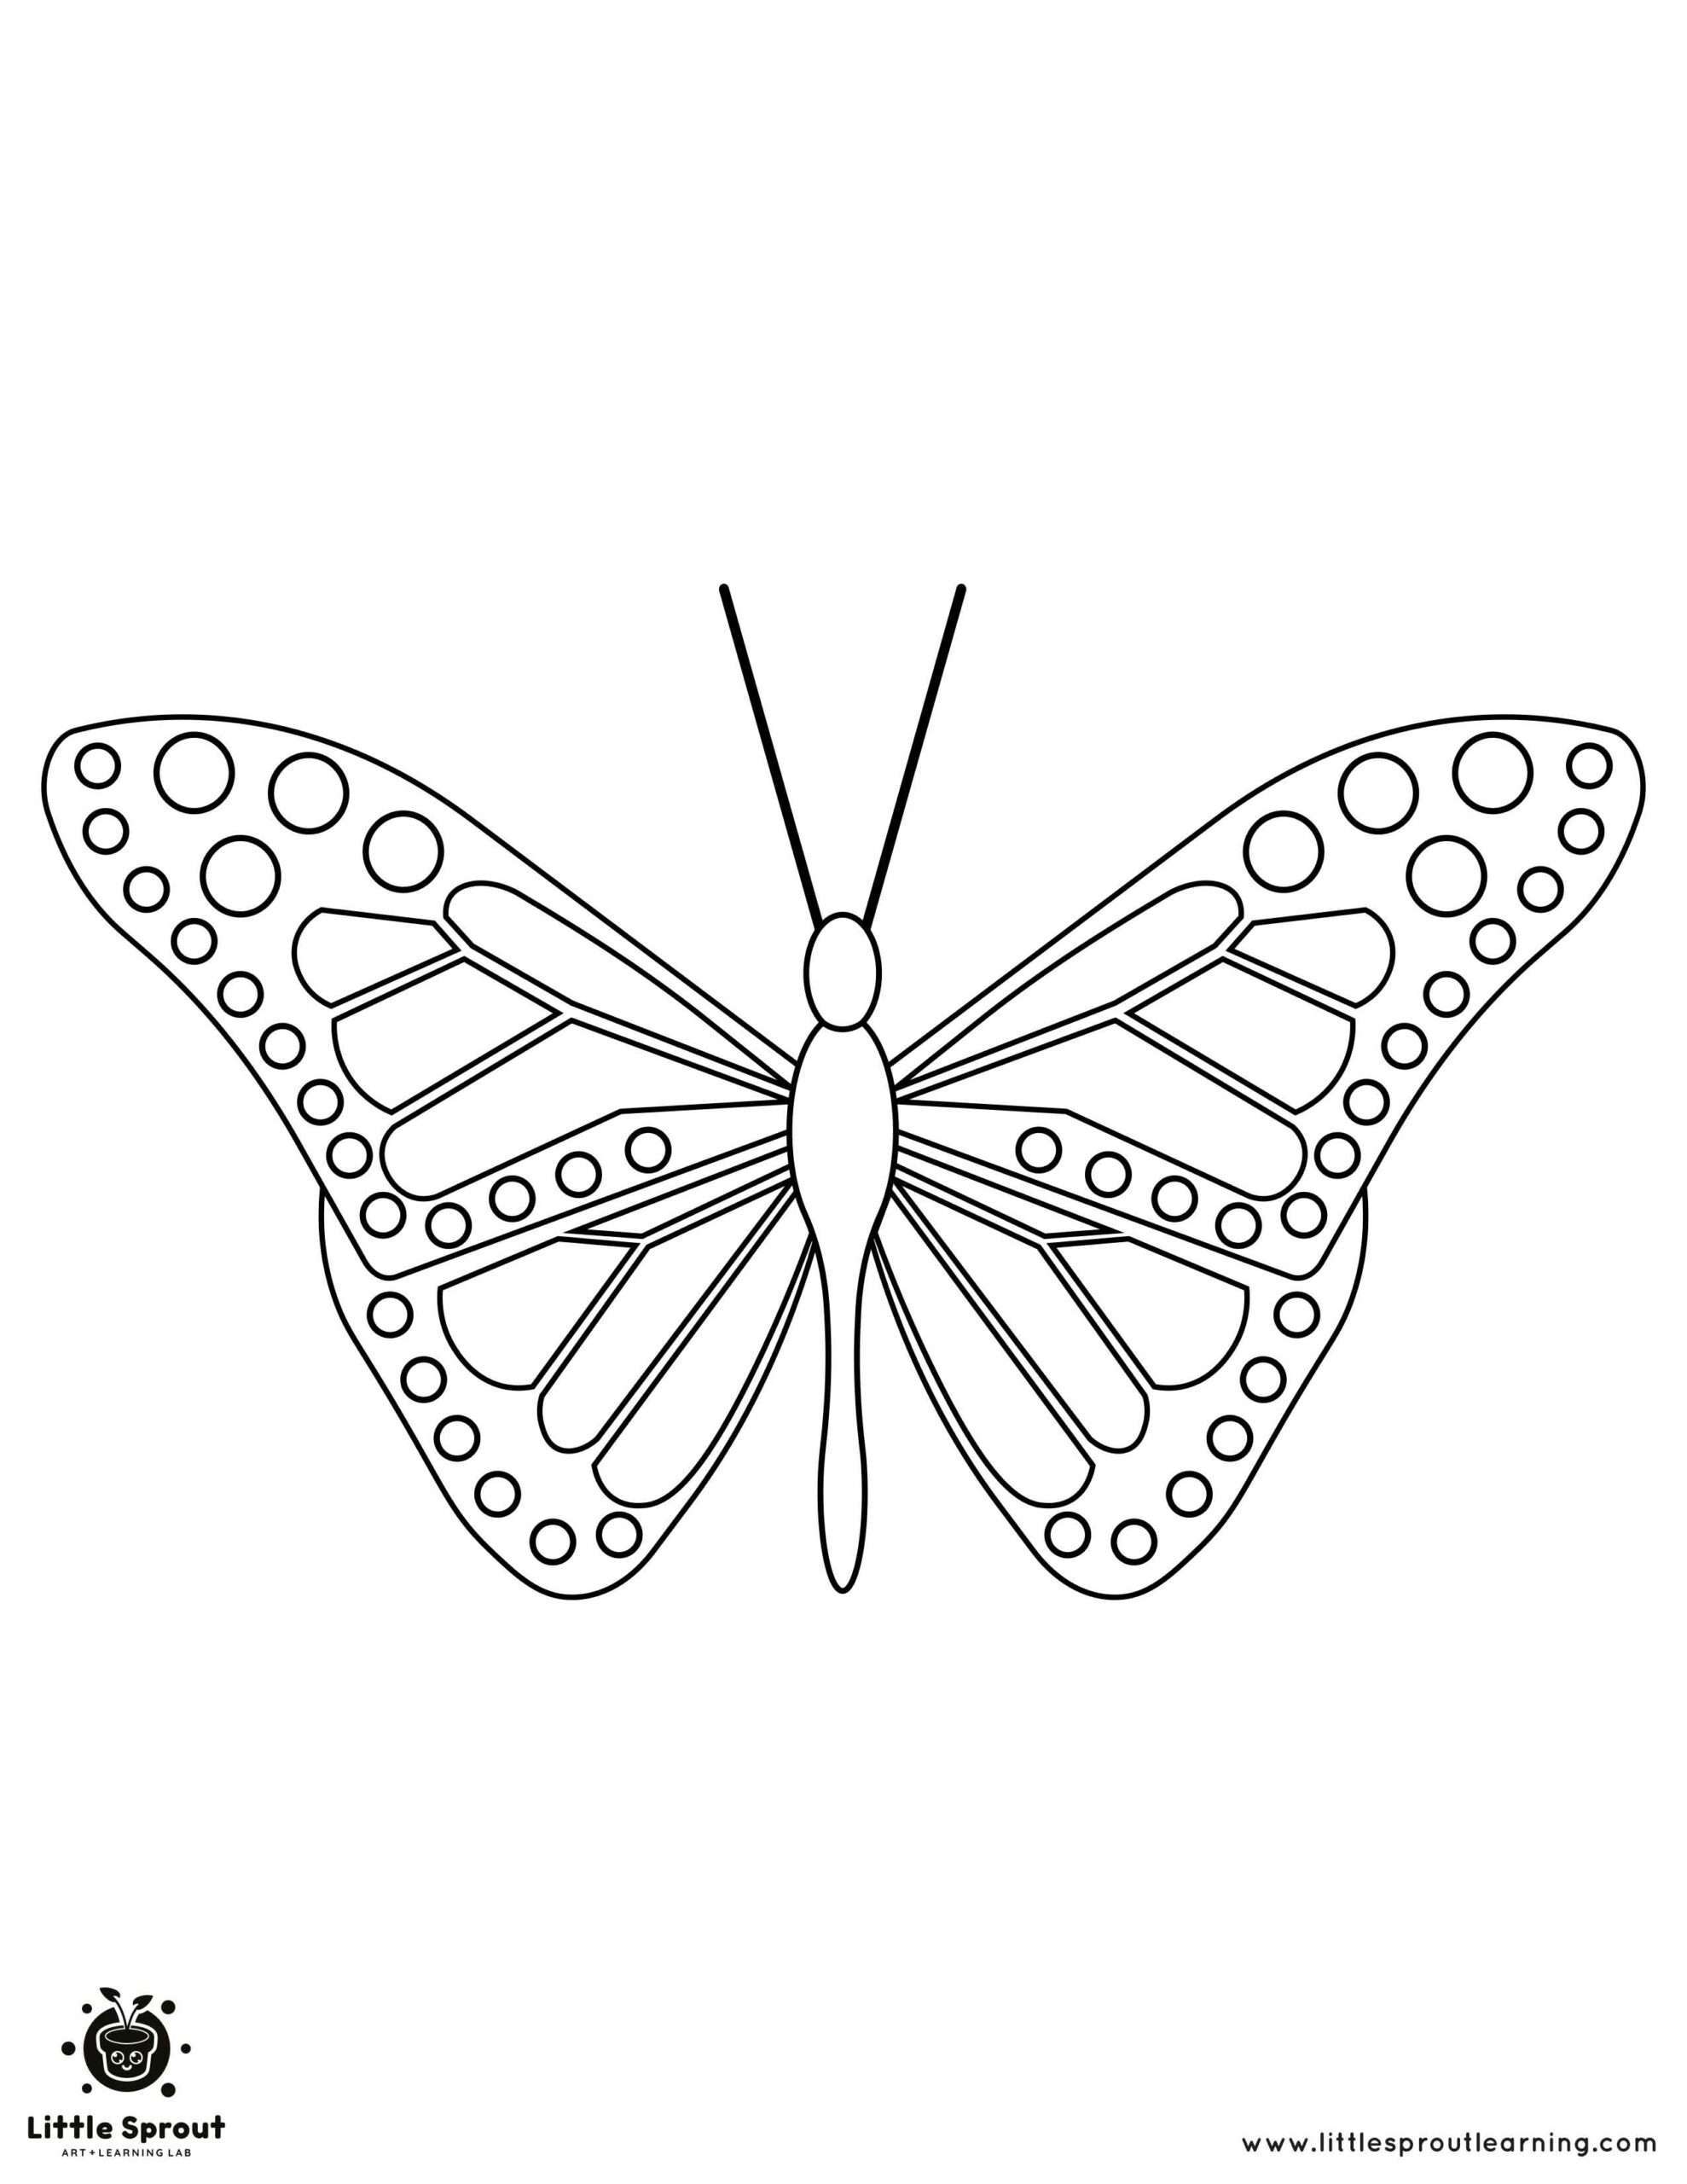 Spotted Butterfly Coloring Page